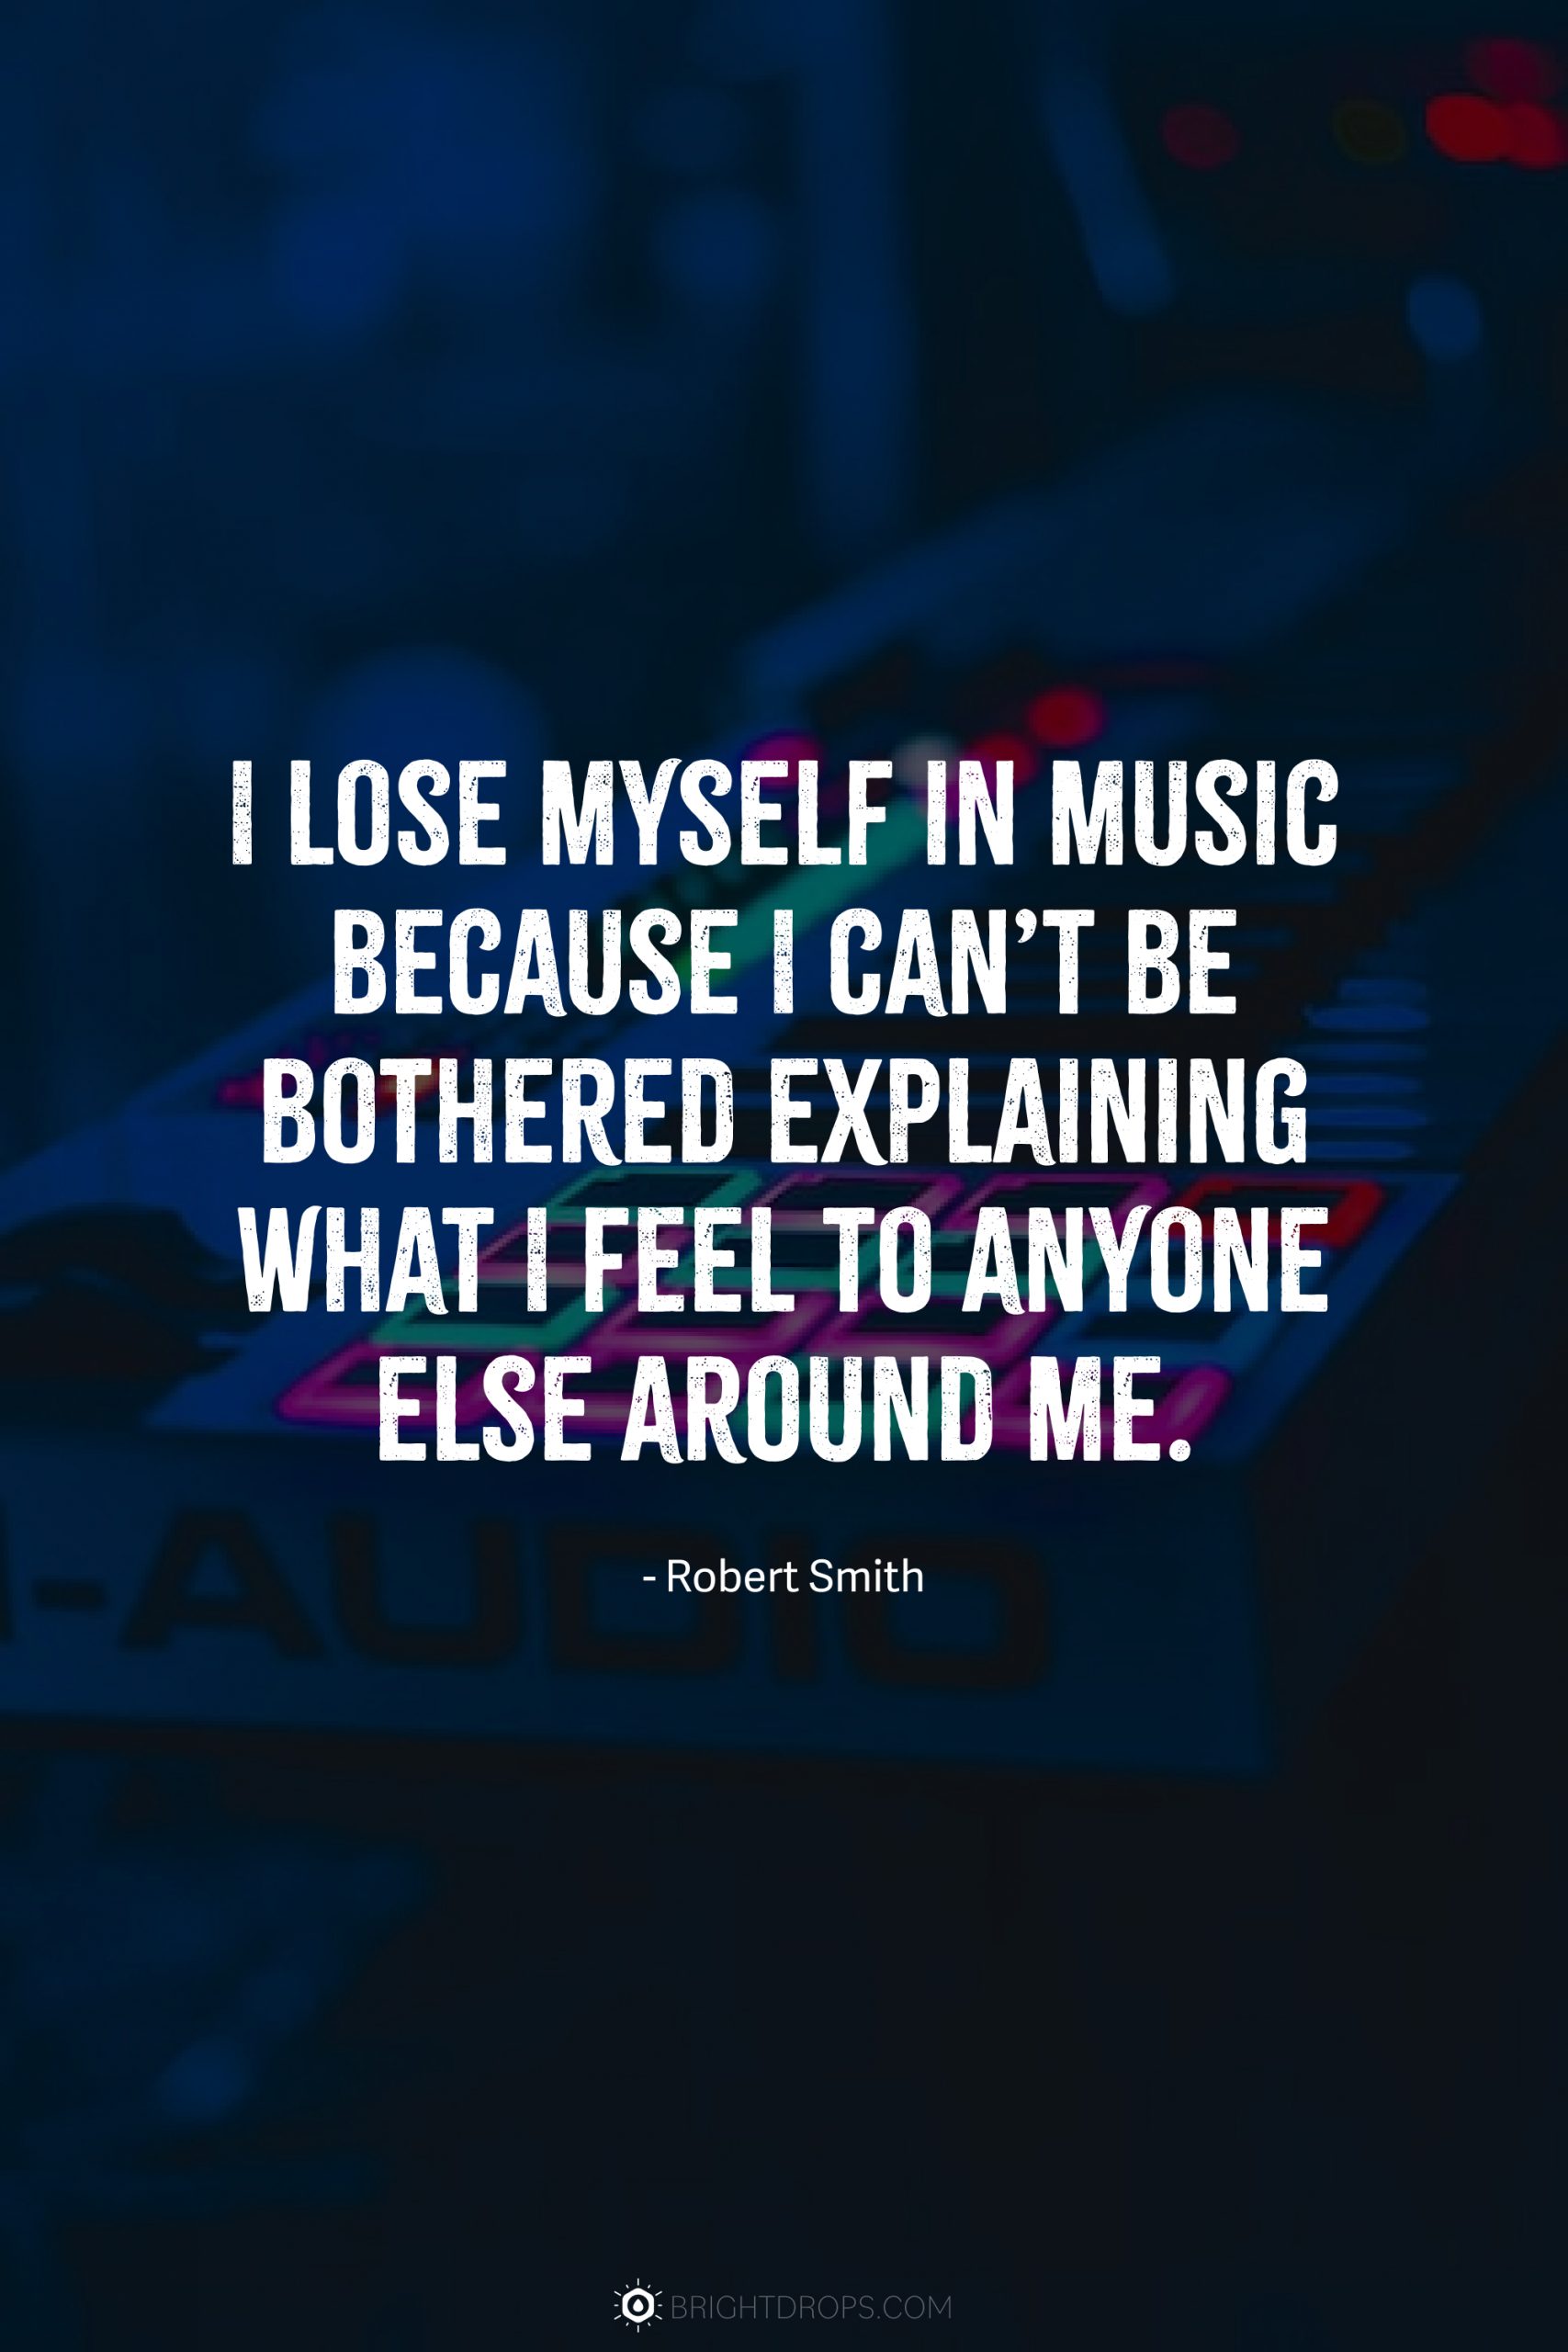 I lose myself in music because I can’t be bothered explaining what I feel to anyone else around me.